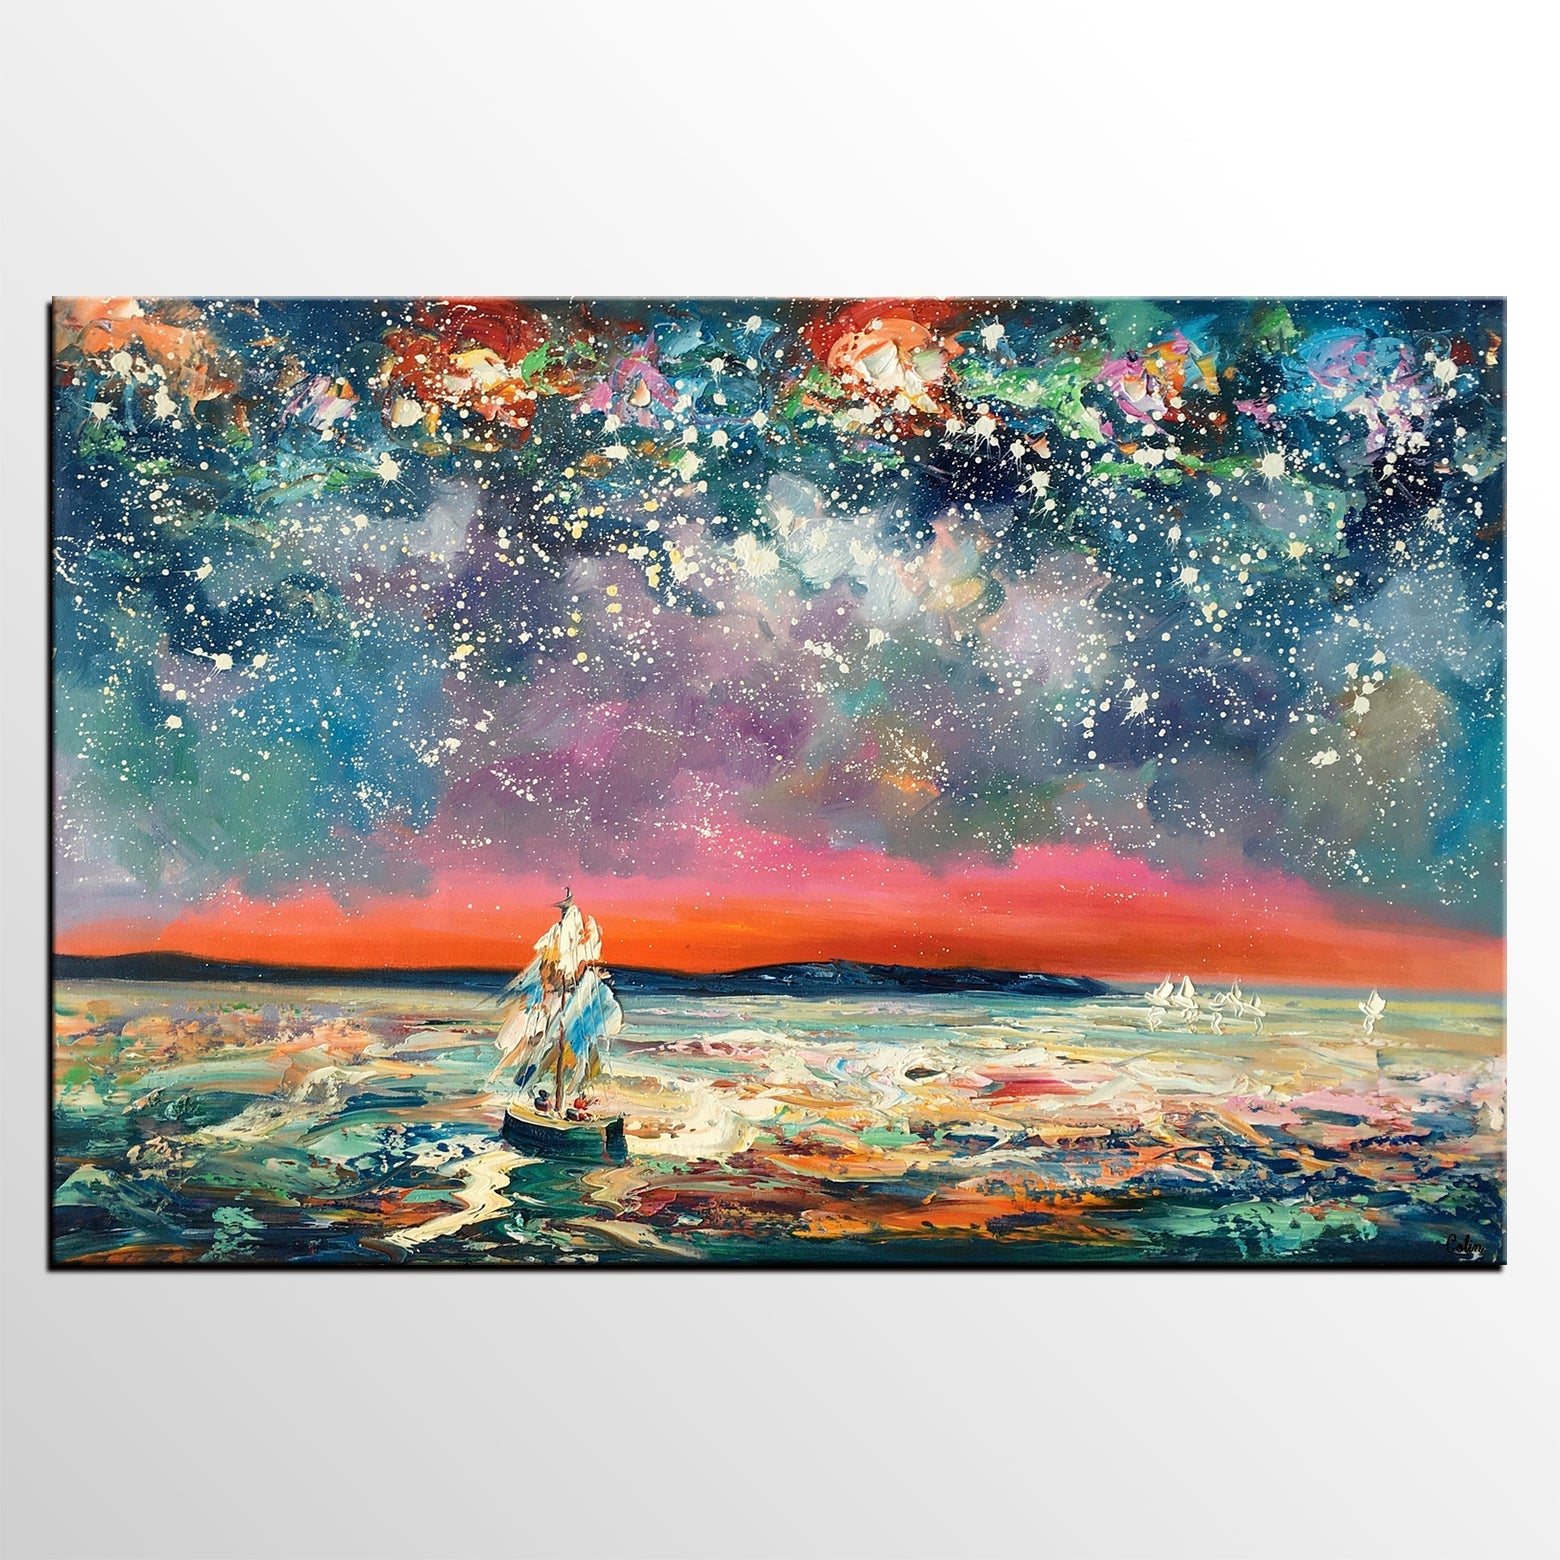 Landscape Canvas Painting, Sail Boat under Starry Night Sky, Canvas Painting for Sale, Custom Landscape Wall Art Paintings, Original Landscape Painting-Paintingforhome